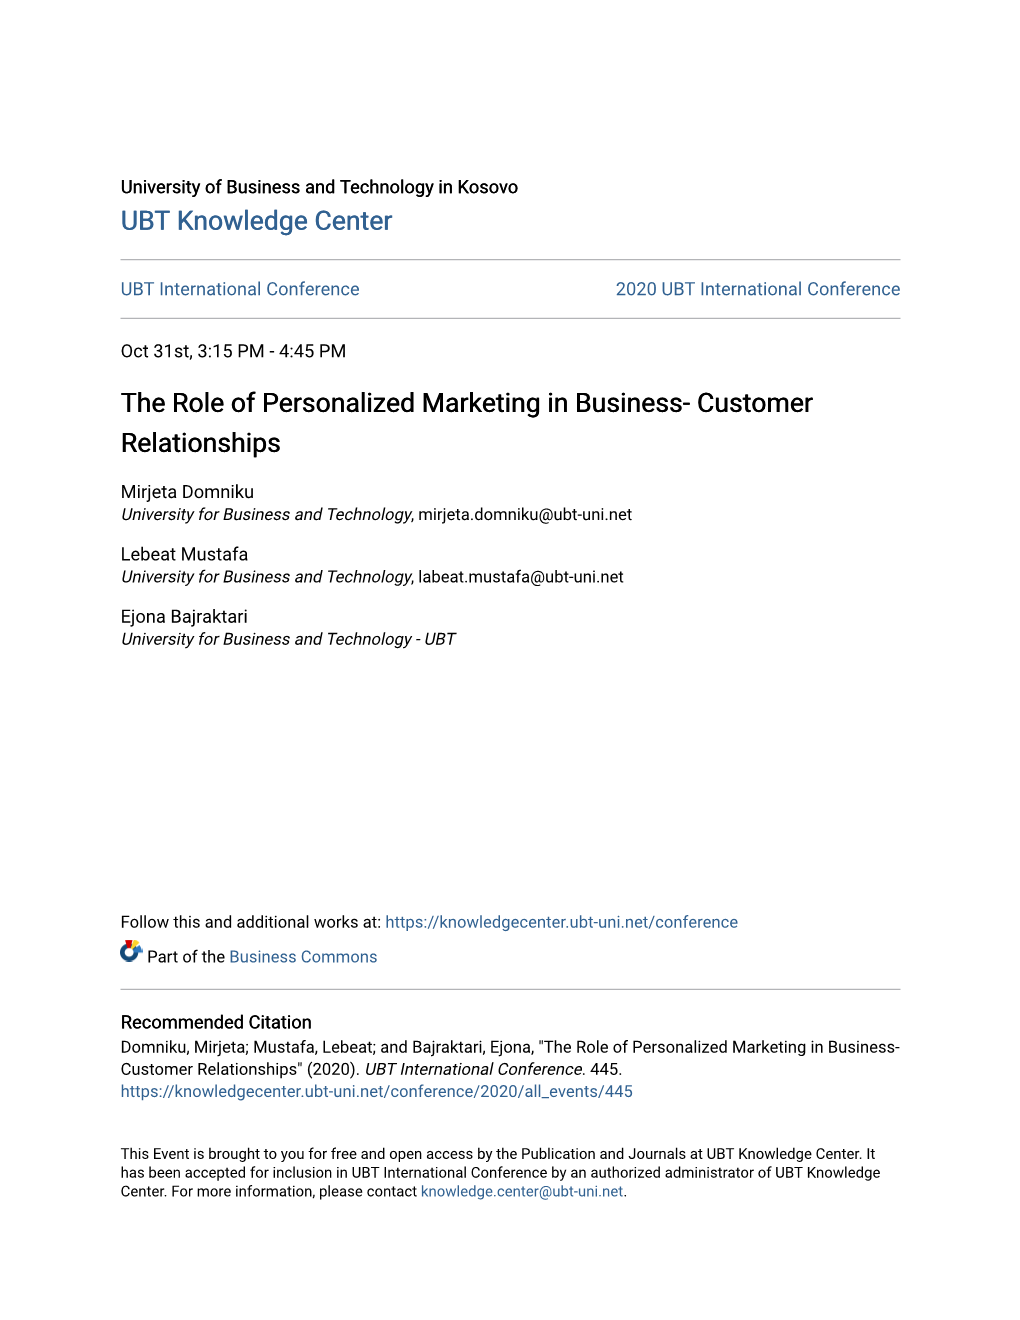 The Role of Personalized Marketing in Business- Customer Relationships